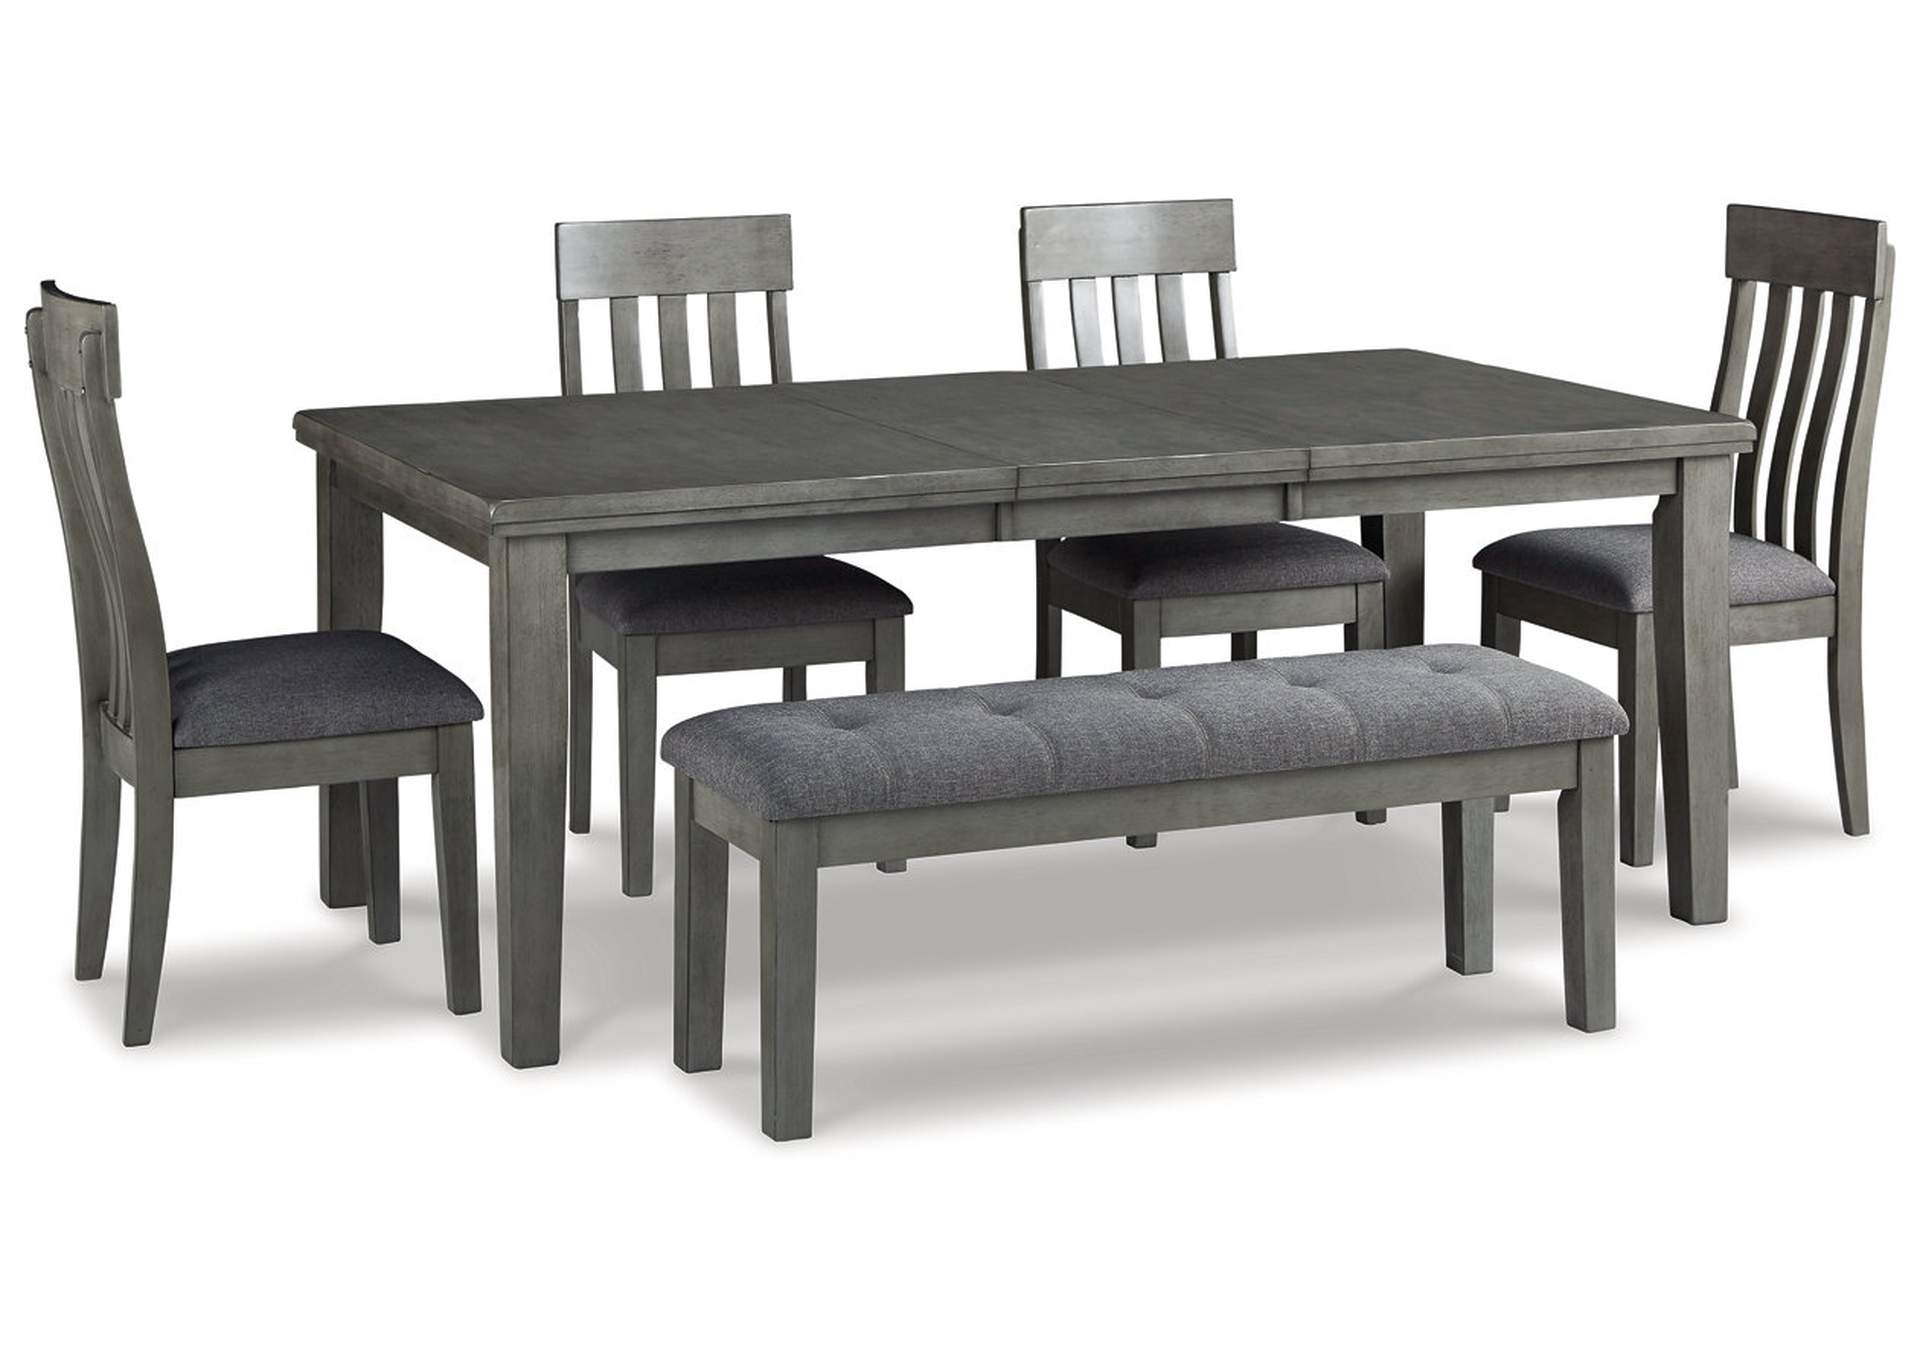 Hallanden Dining Table and 4 Chairs and Bench,Signature Design By Ashley